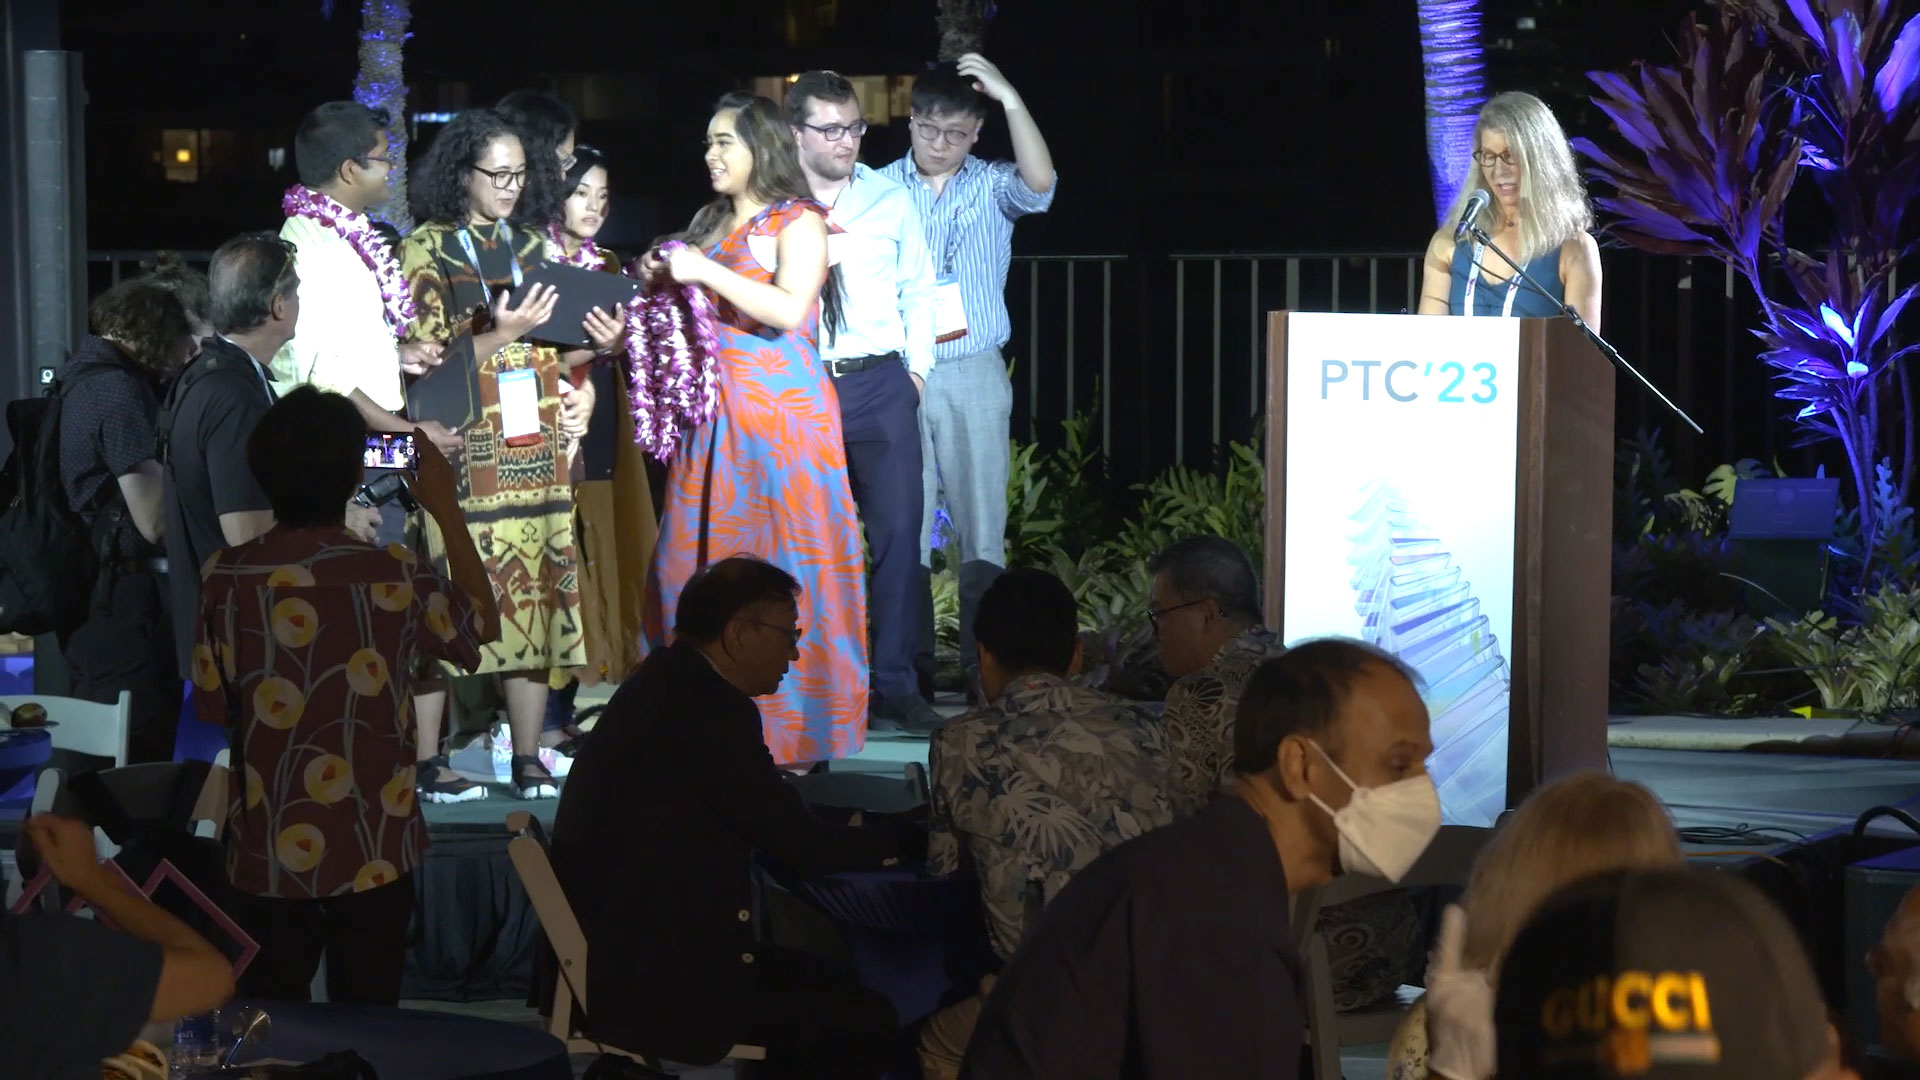 Check out some highlights from the PTC Awards 2023 event at PTC'23 in Honolulu, Hawaii.